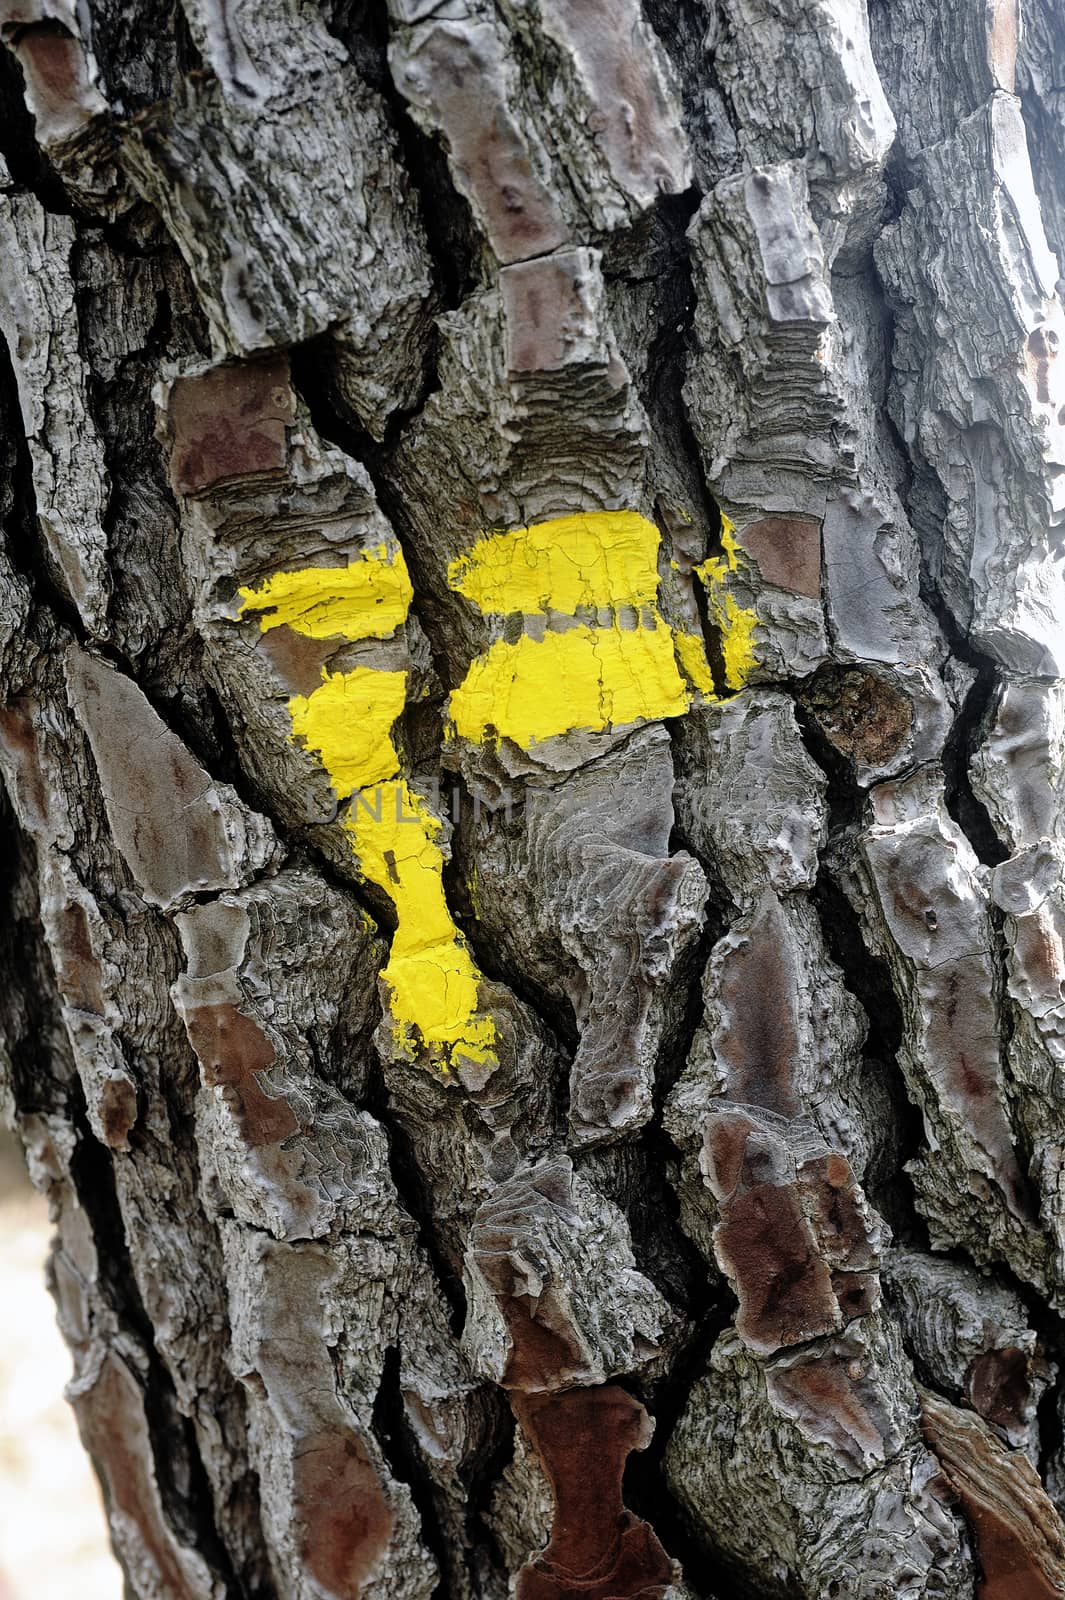 Tagging footpath with yellow paint on a tree trunk to indicate a change of direction.